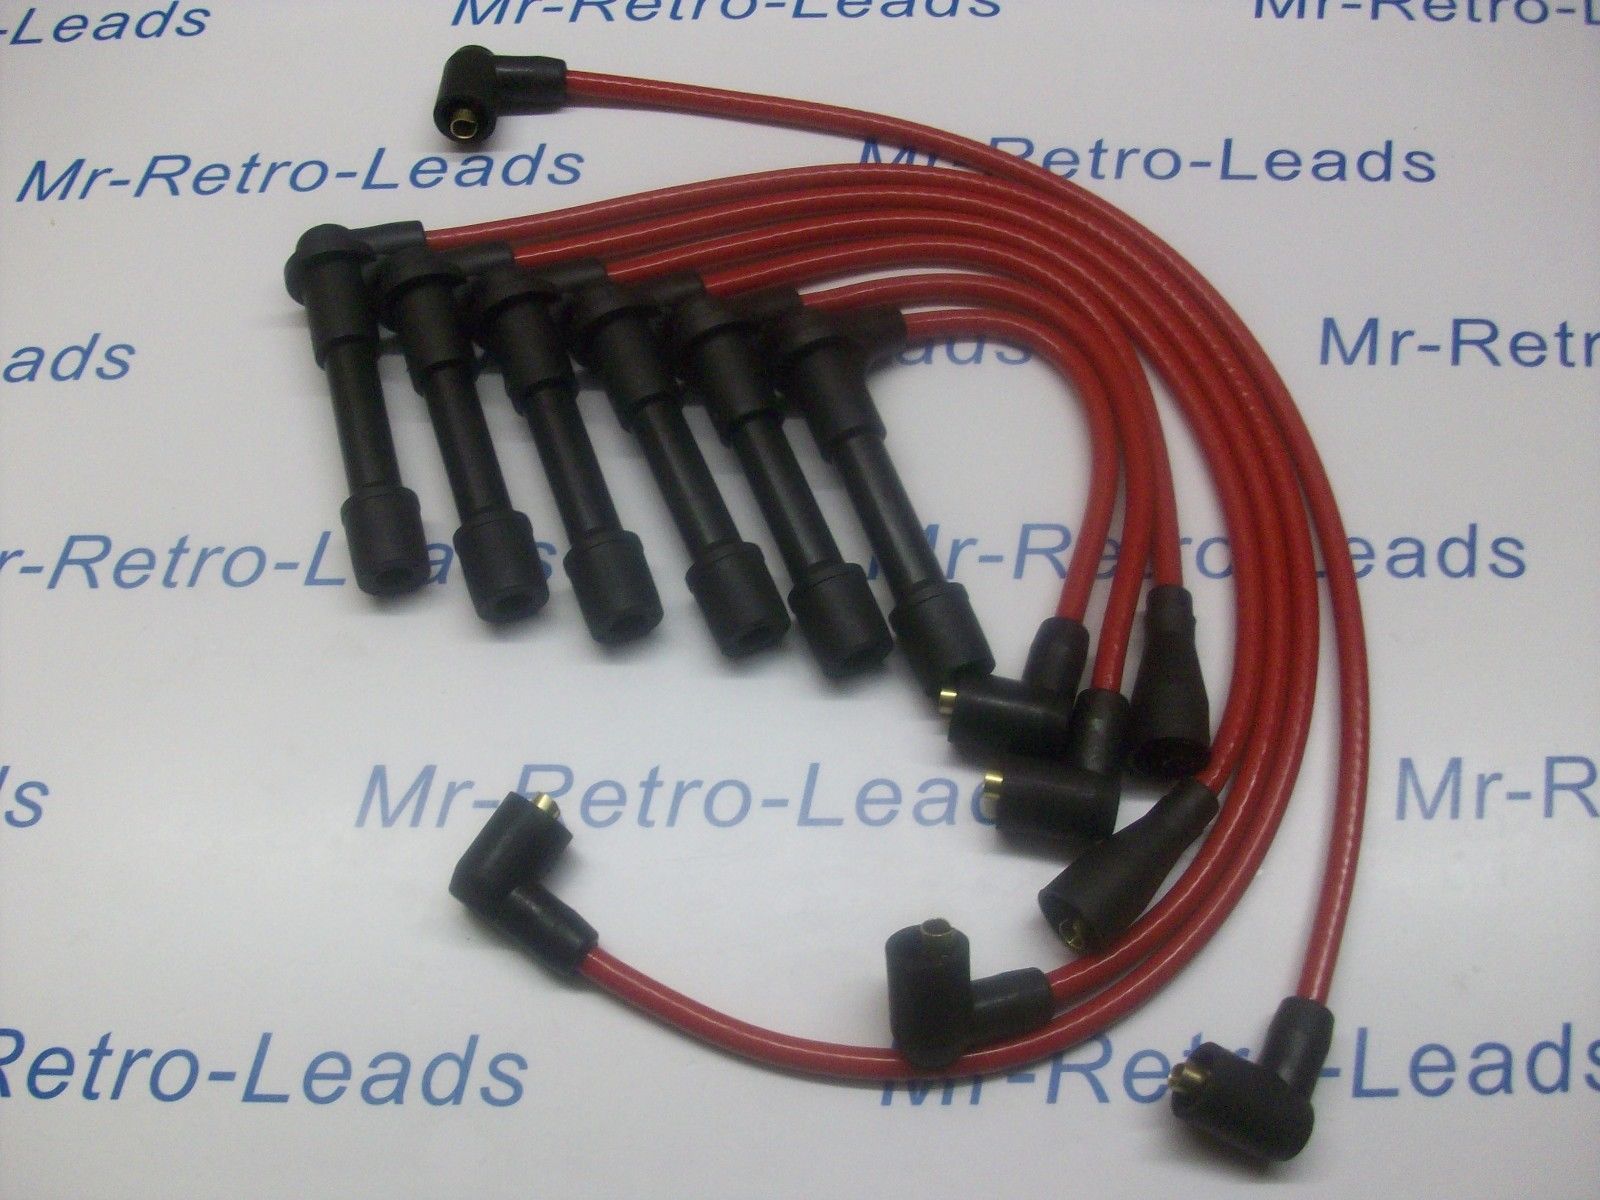 Red 8mm Performance Ignition Leads For Nissan 300zx 300 Zx Twin Turbo Z31 Z32 V6